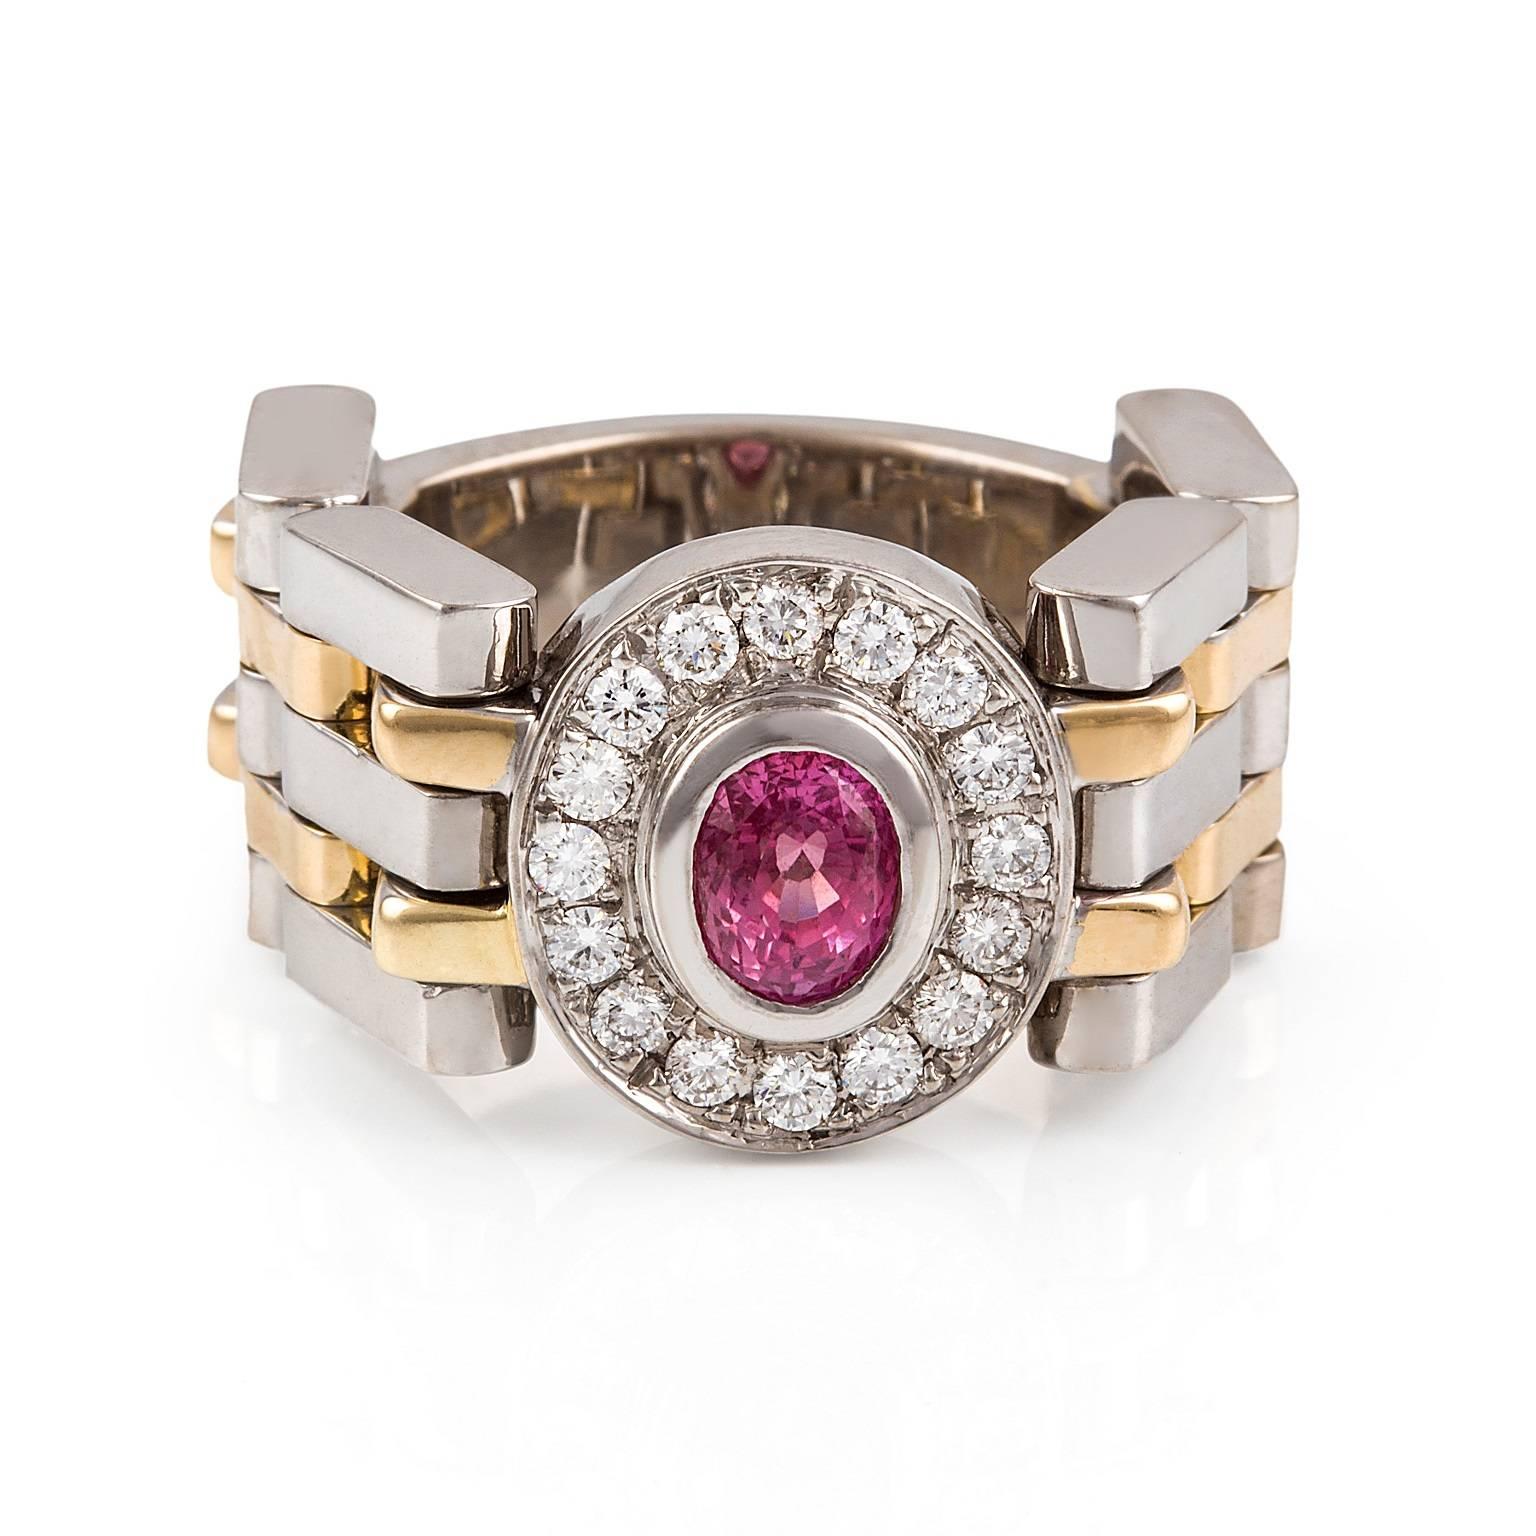 Rosa Zaffiro & Diamante Ring

This distinctive hand-made 18 carat two-tone gold ring is set with a beautiful padparadascha sapphire that is surrounded by a halo of bead set diamonds.

Oval faceted padparadascha sapphire: Medium pink colour, 6.0 x